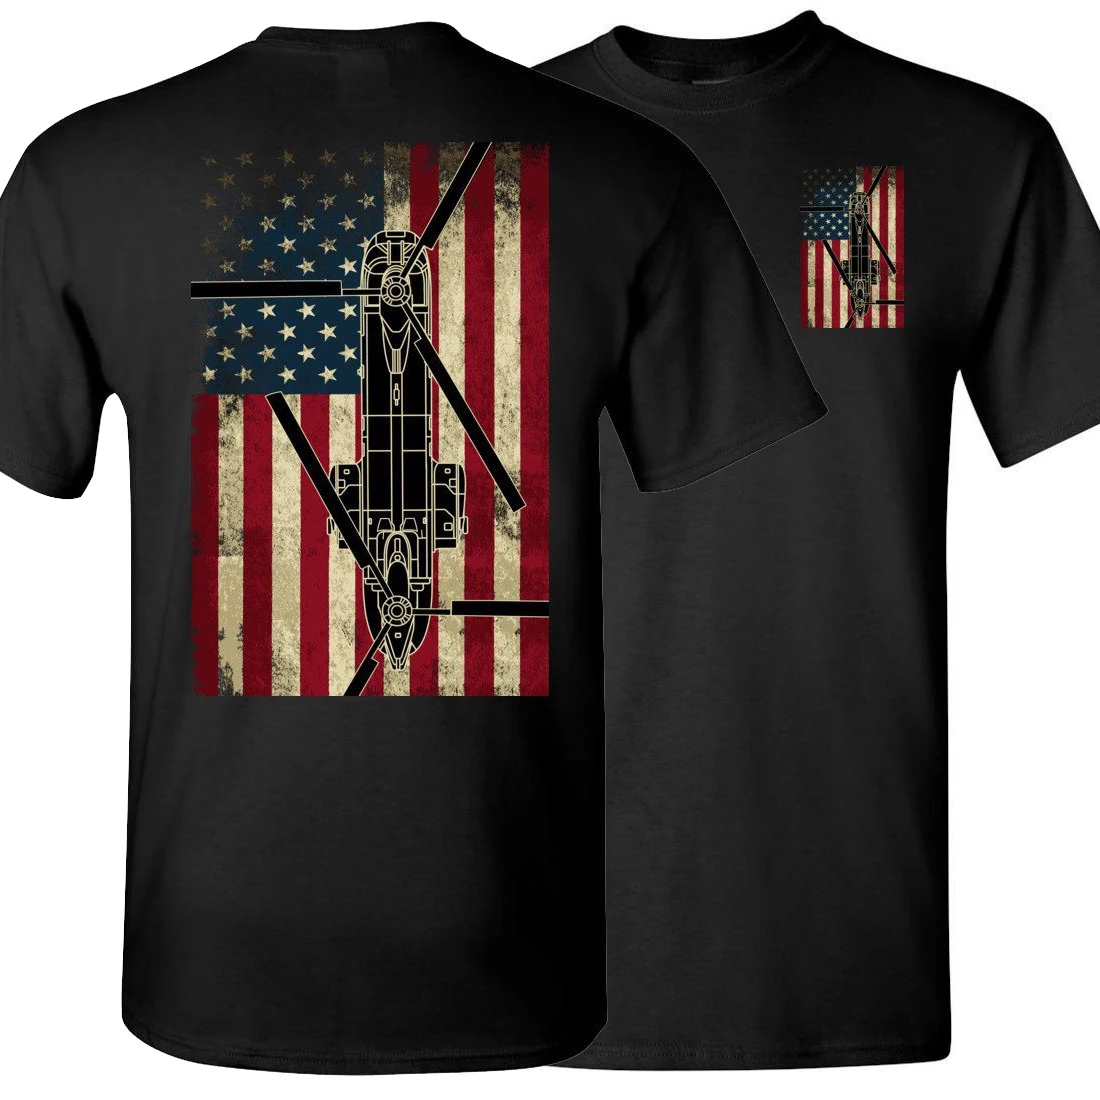 

American Flag CH-46 SeaKnight Transport Helicopter T Shirt. Short Sleeve 100% Cotton Casual T-shirts Loose Top Size S-3XL